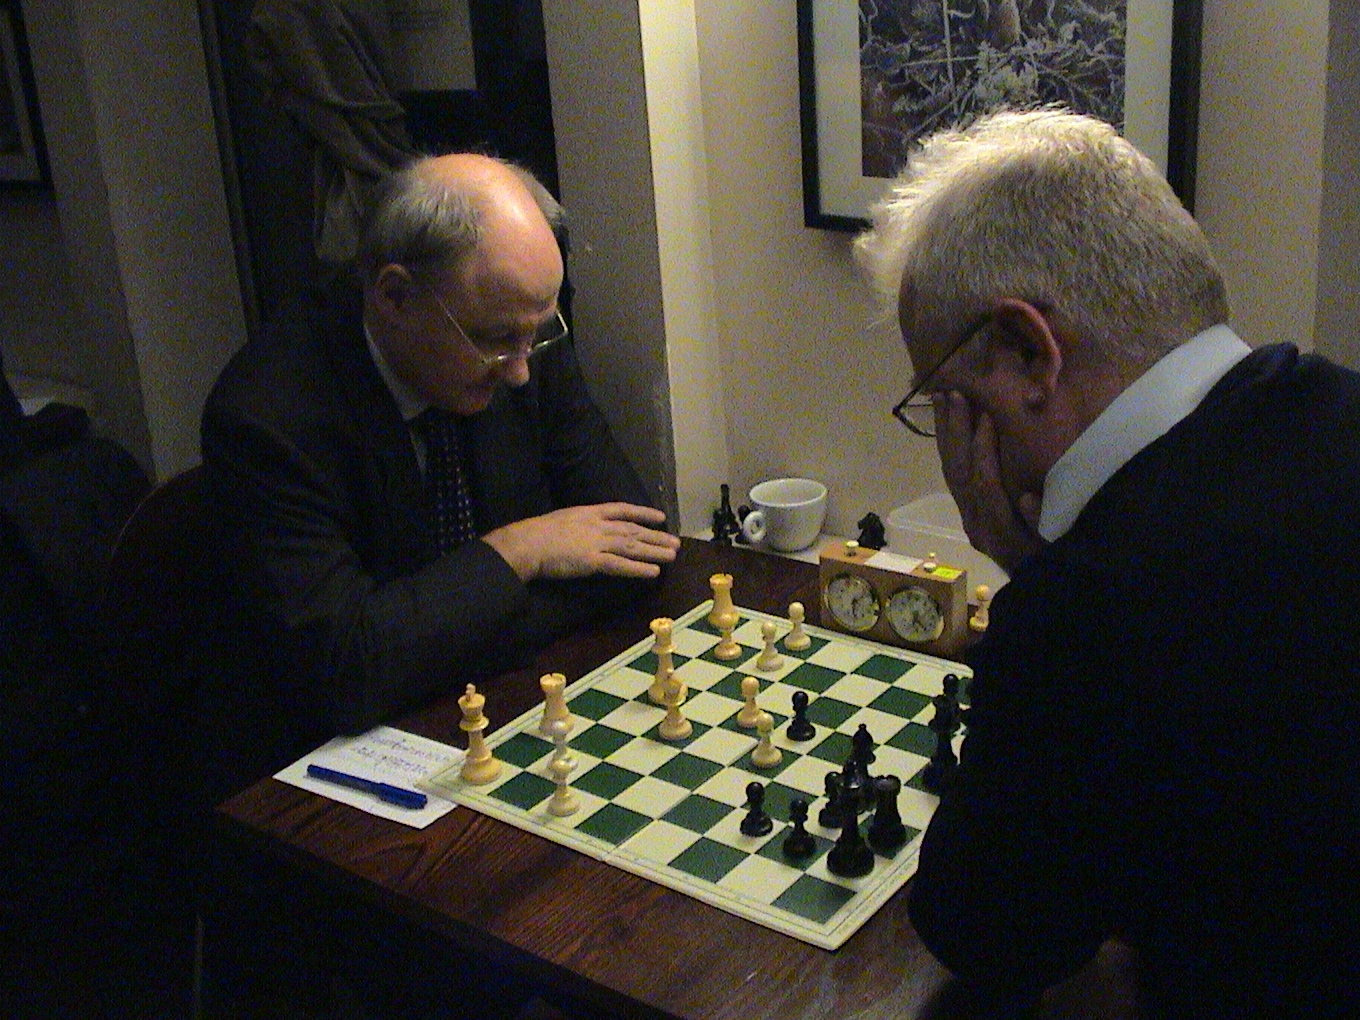 two men play a game of chess in front of their friends